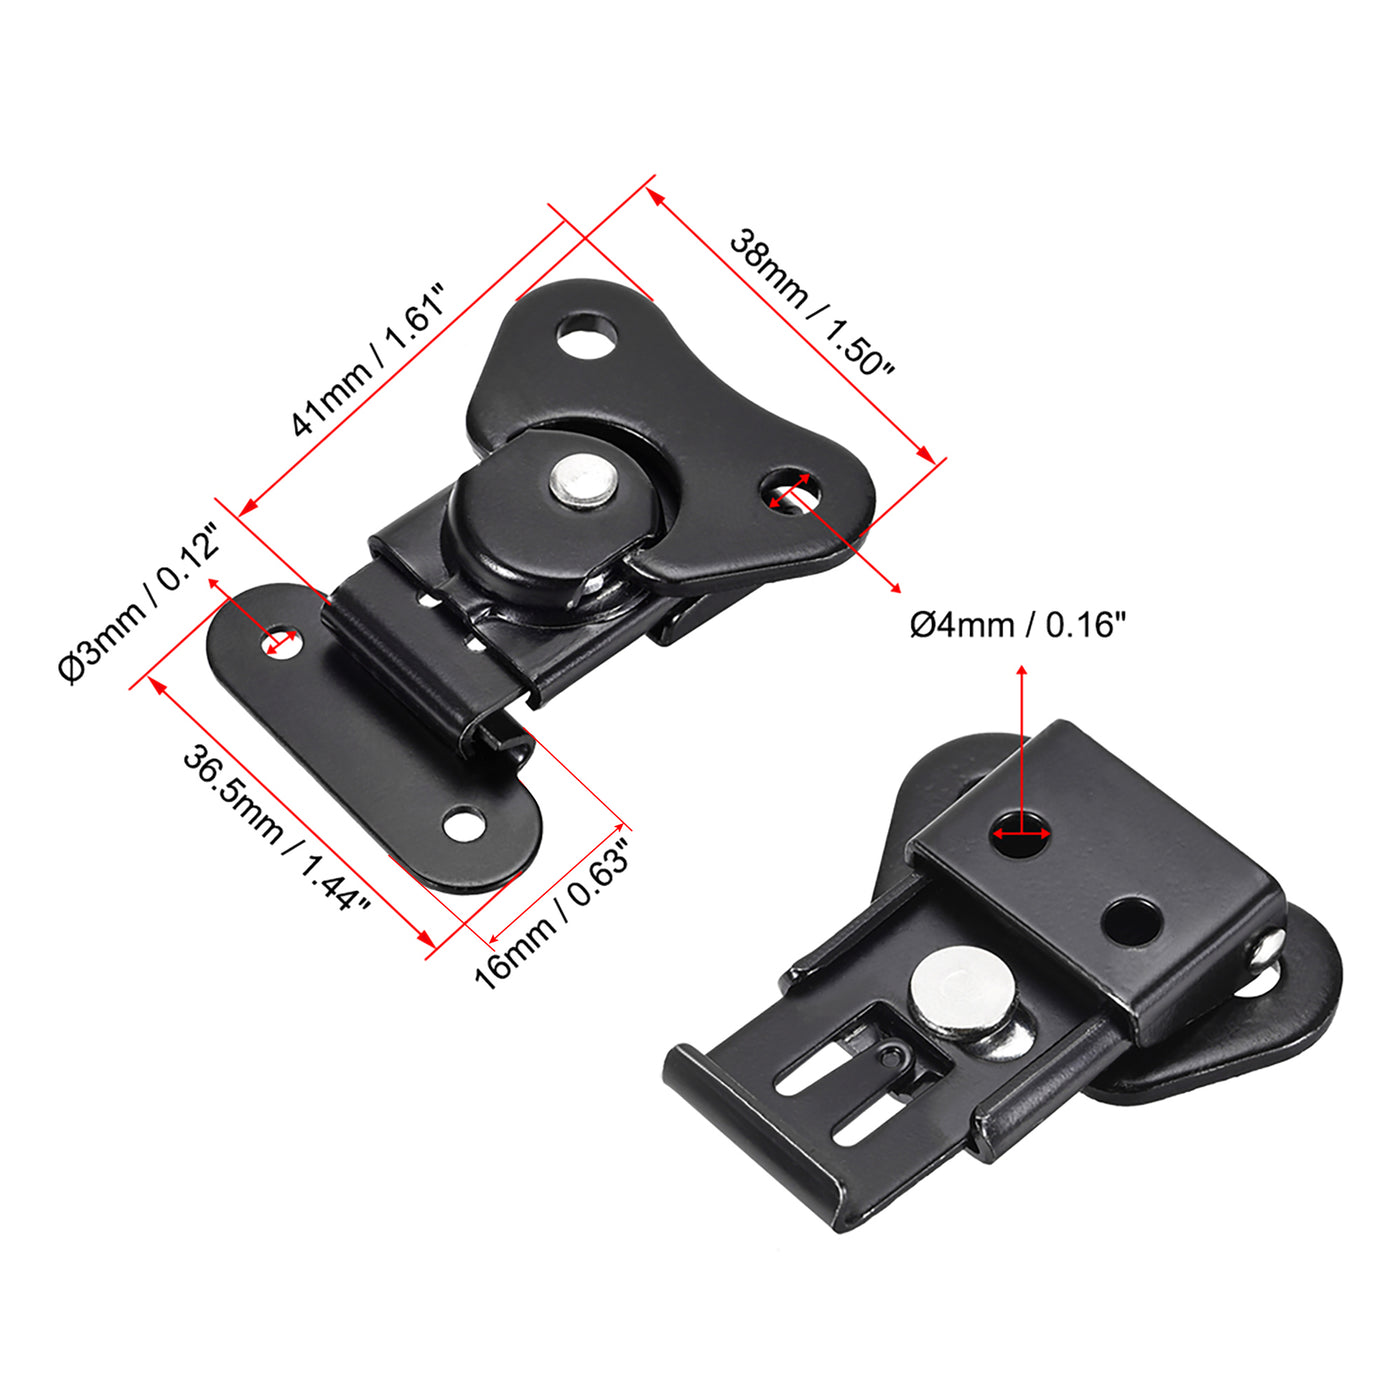 uxcell Uxcell 1.61-inch Iron Butterfly Twist Latch Keeper Toggle Clamp - 2 Pcs (Black)